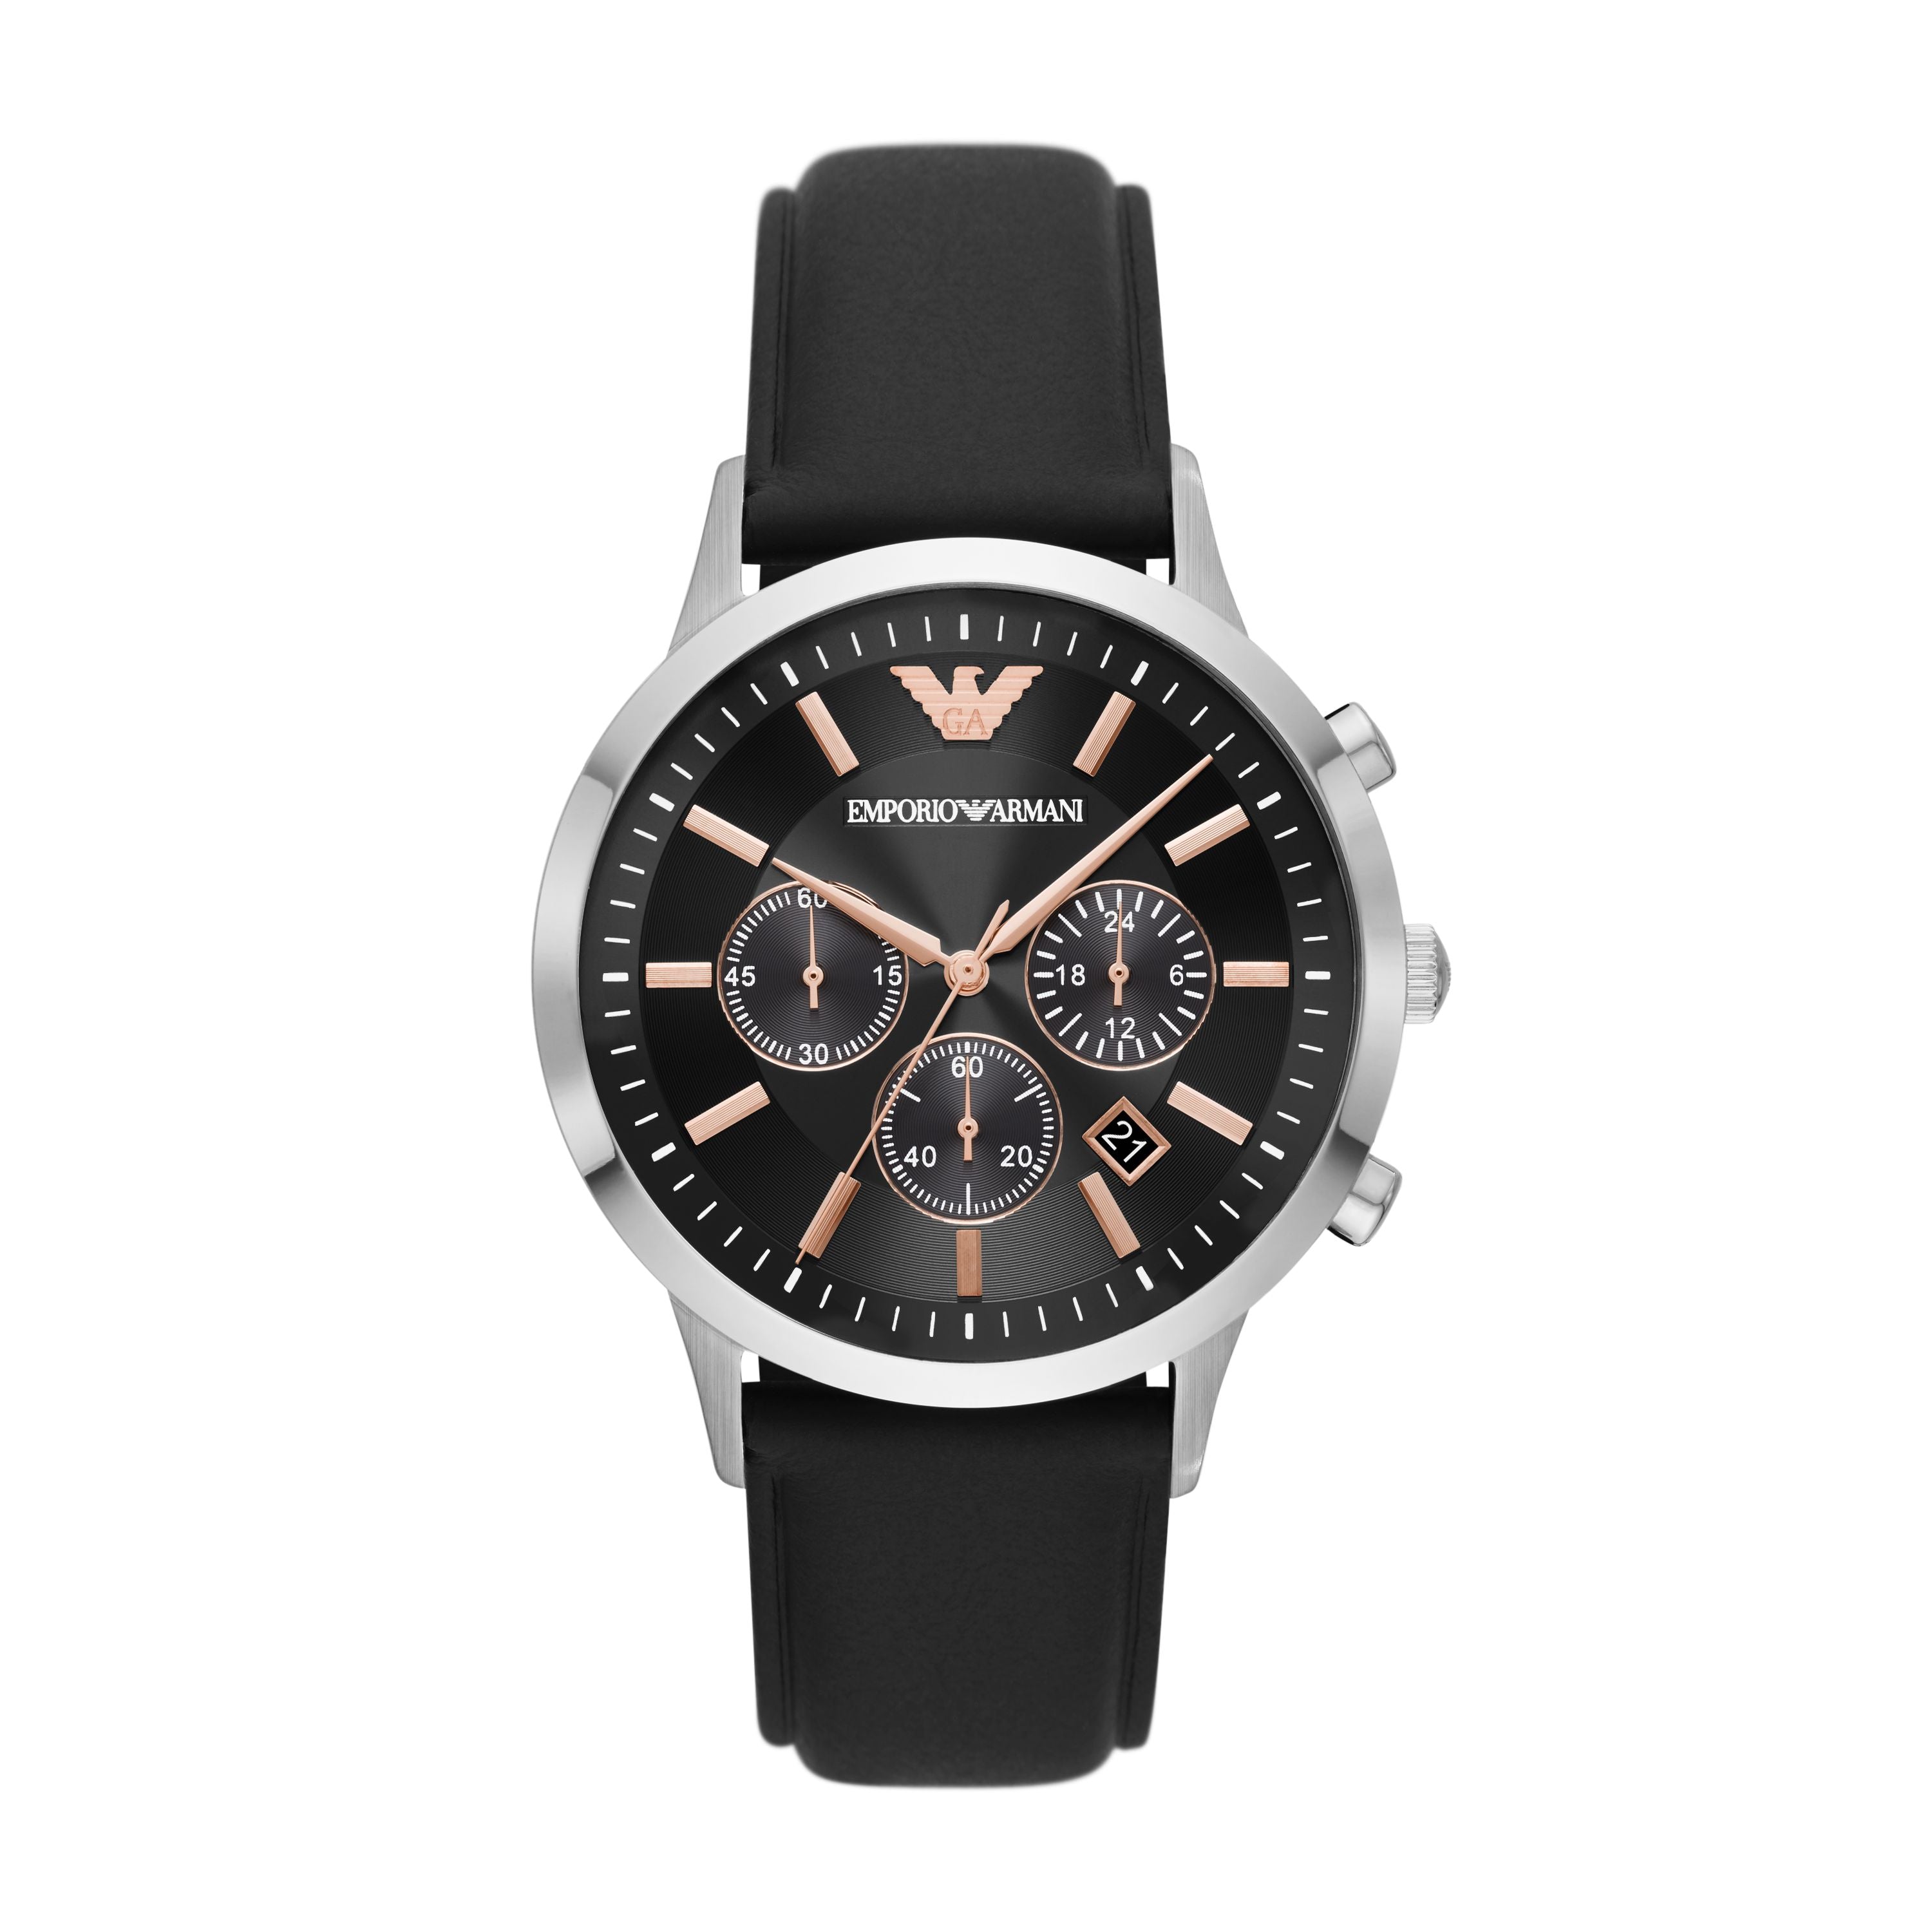 EMPORIO ARMANI ANALOG WATCH 0 JWL SS LEATHER STRAP – The Watch House